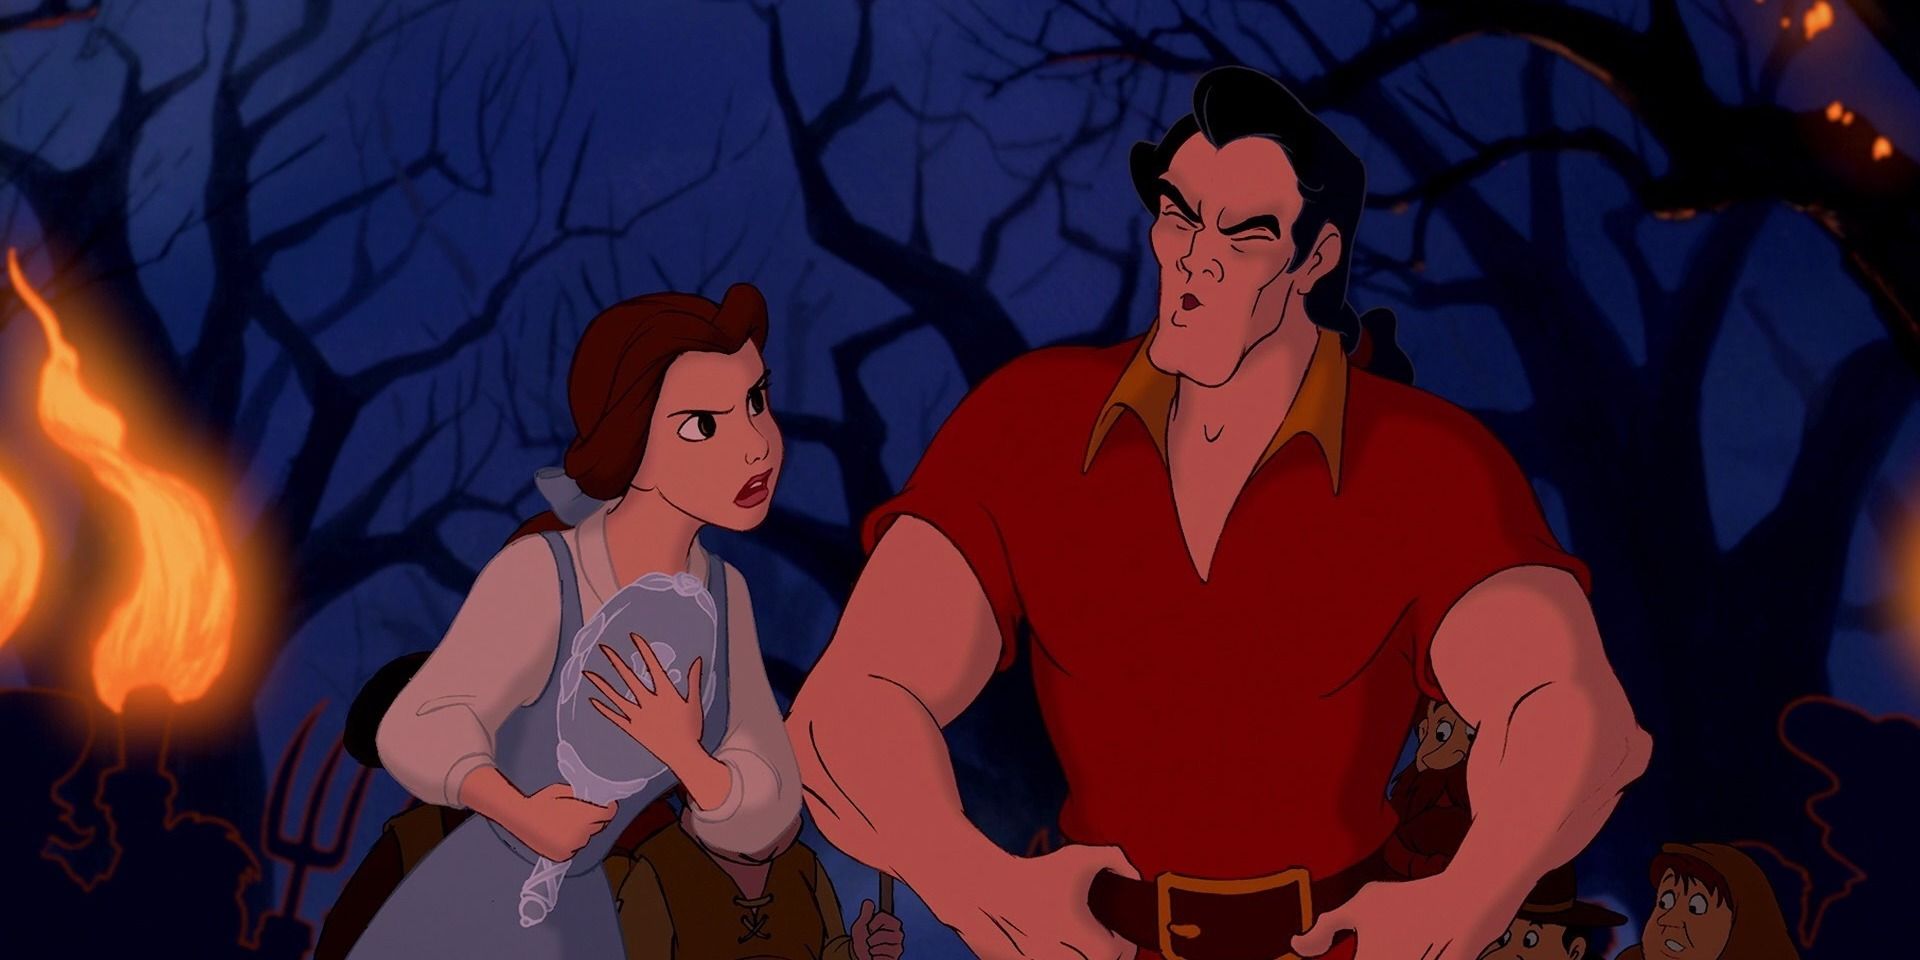 Belle scolds Gaston in Beauty and the Beast